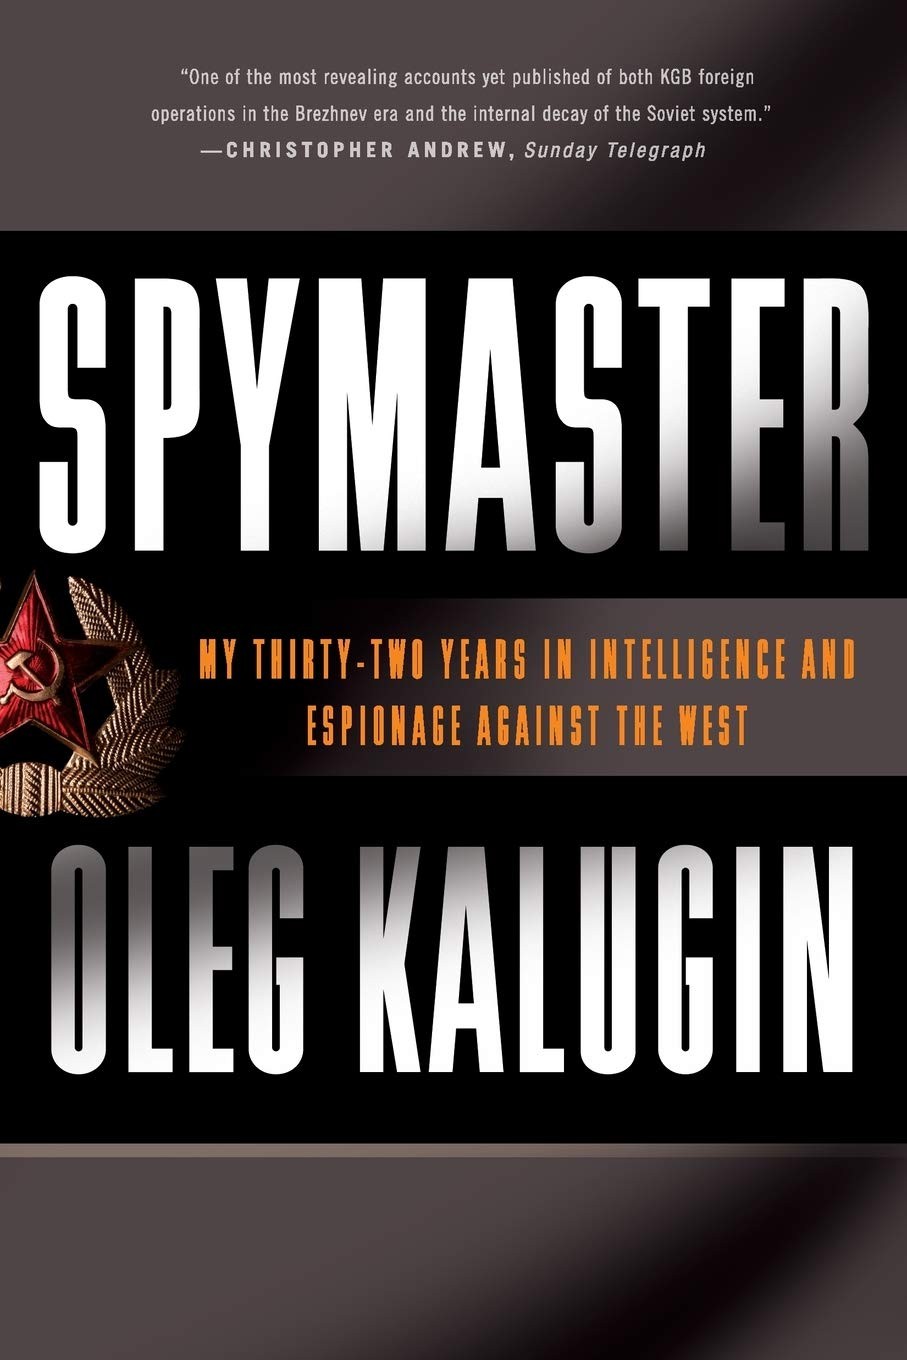 Spymaster: My Thirty-Two Years in Intelligence and Espionage Against the West